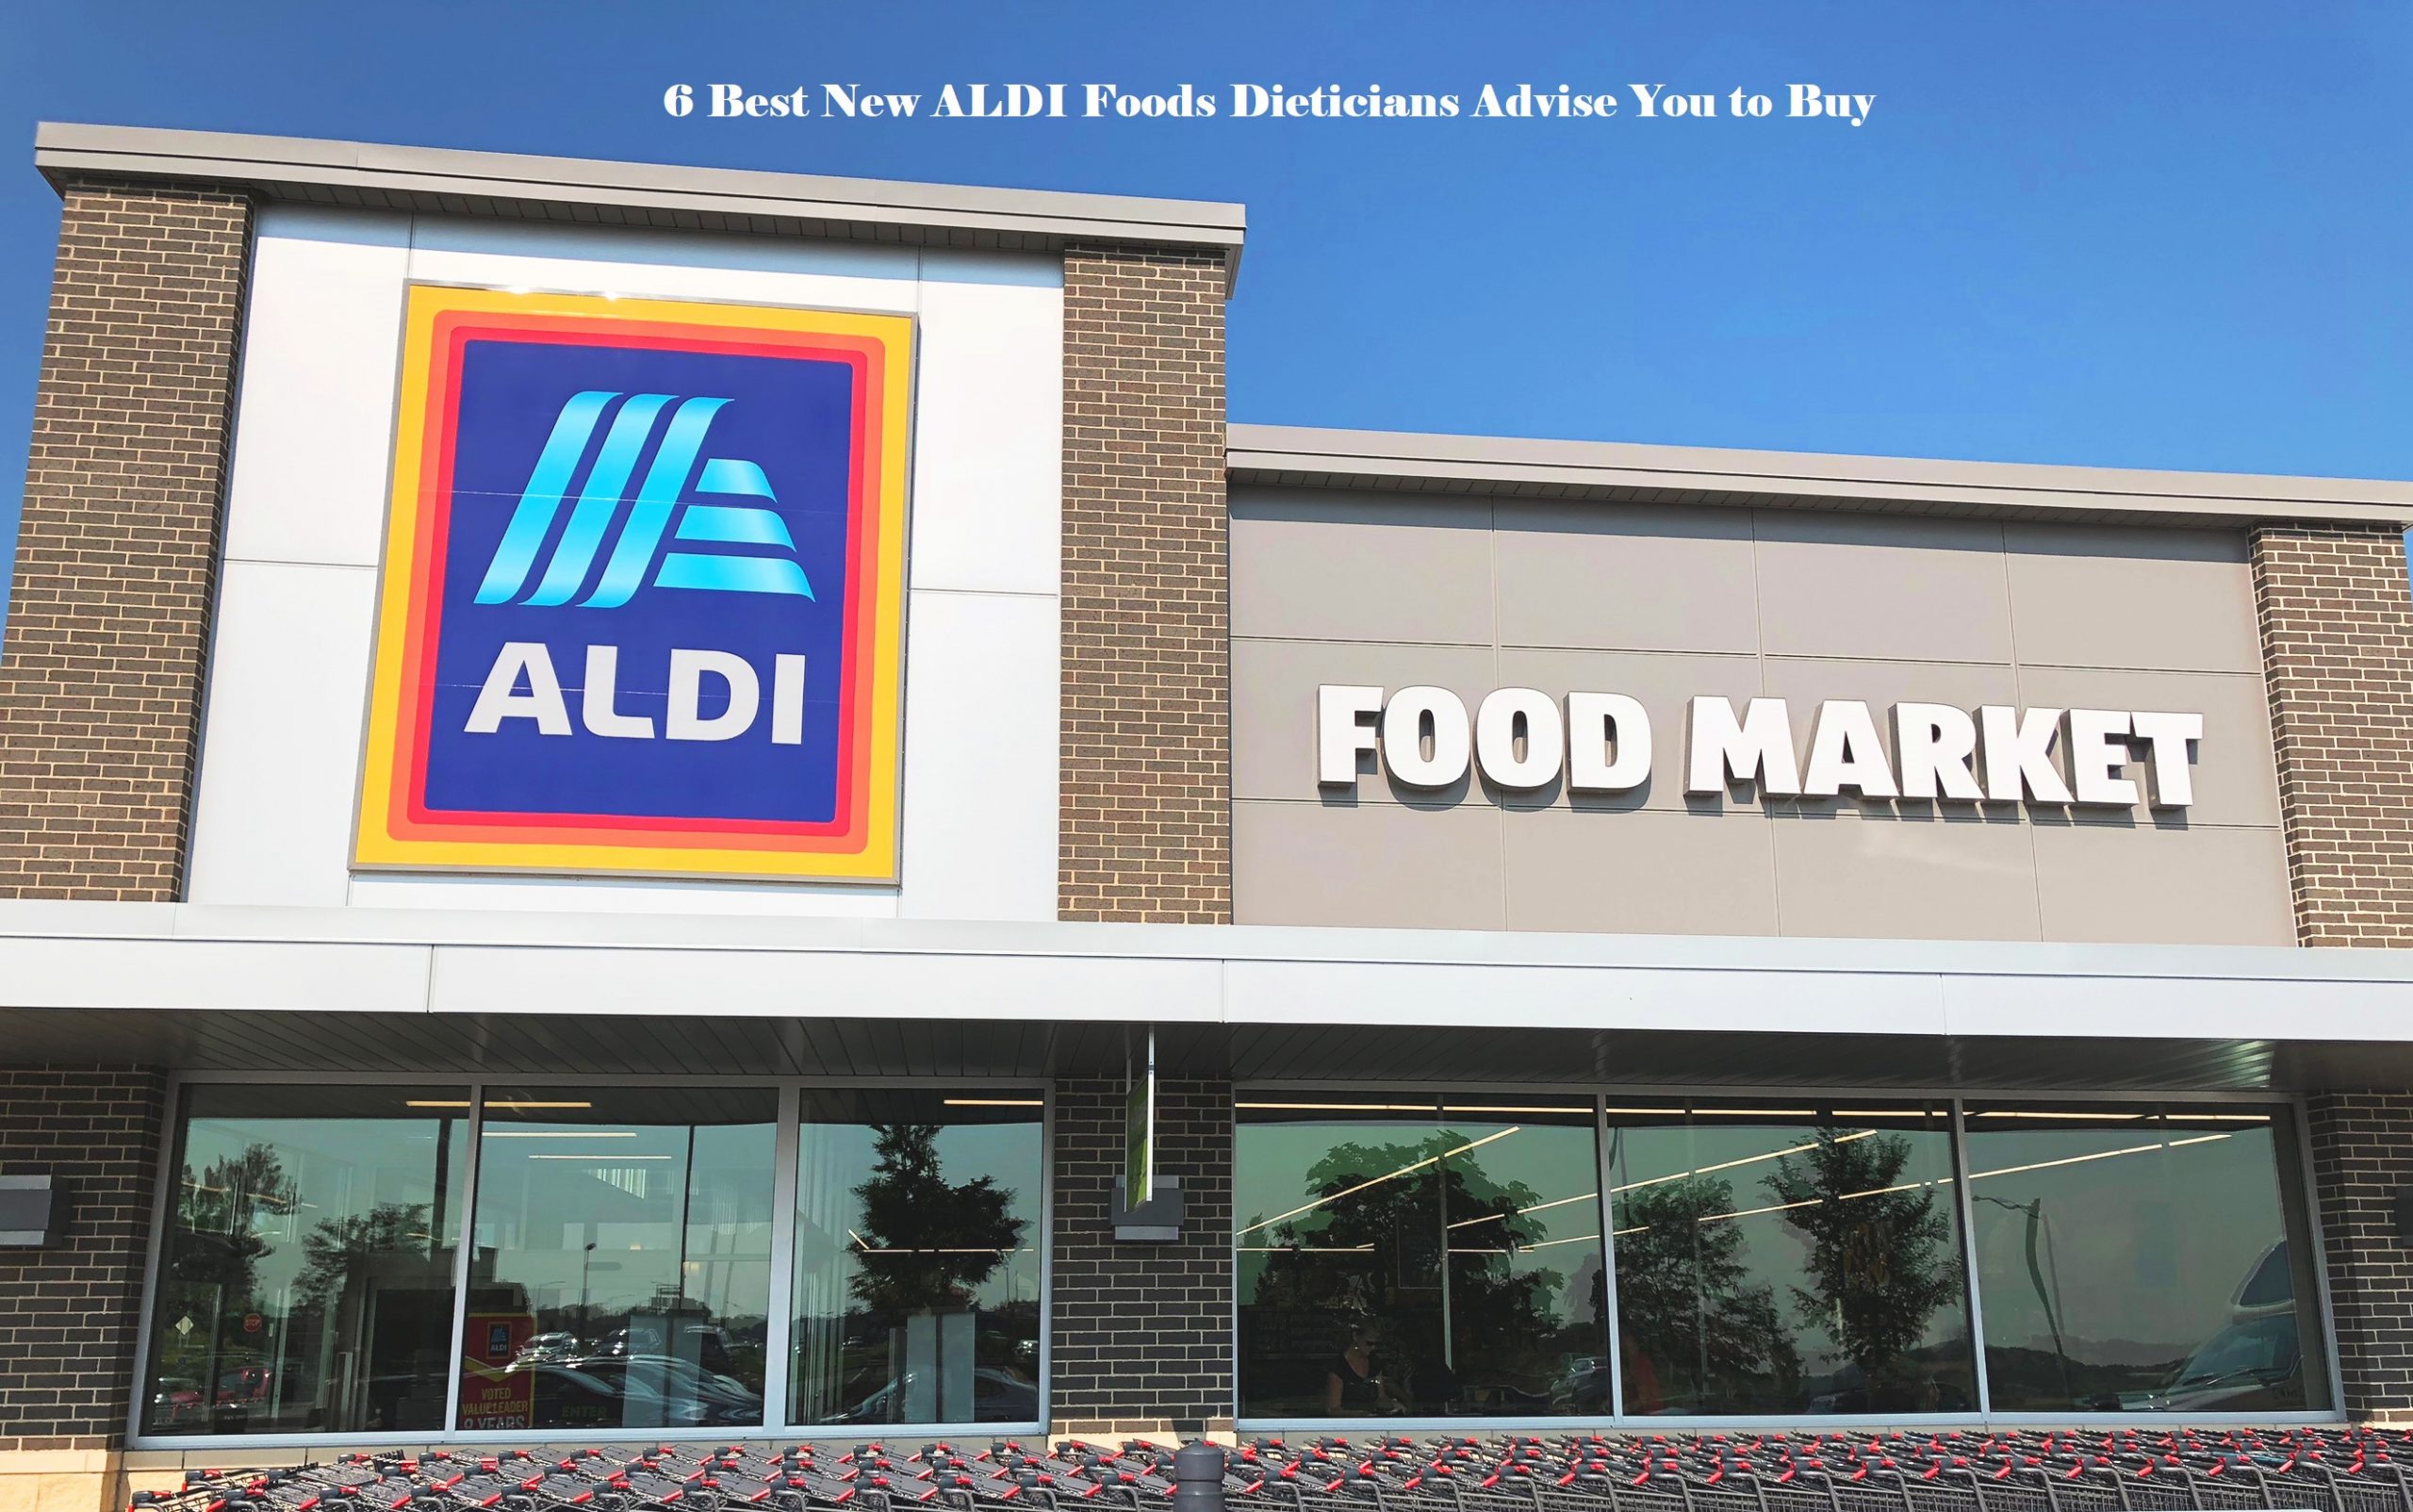 6 Best New ALDI Foods Dieticians Advise You to Buy